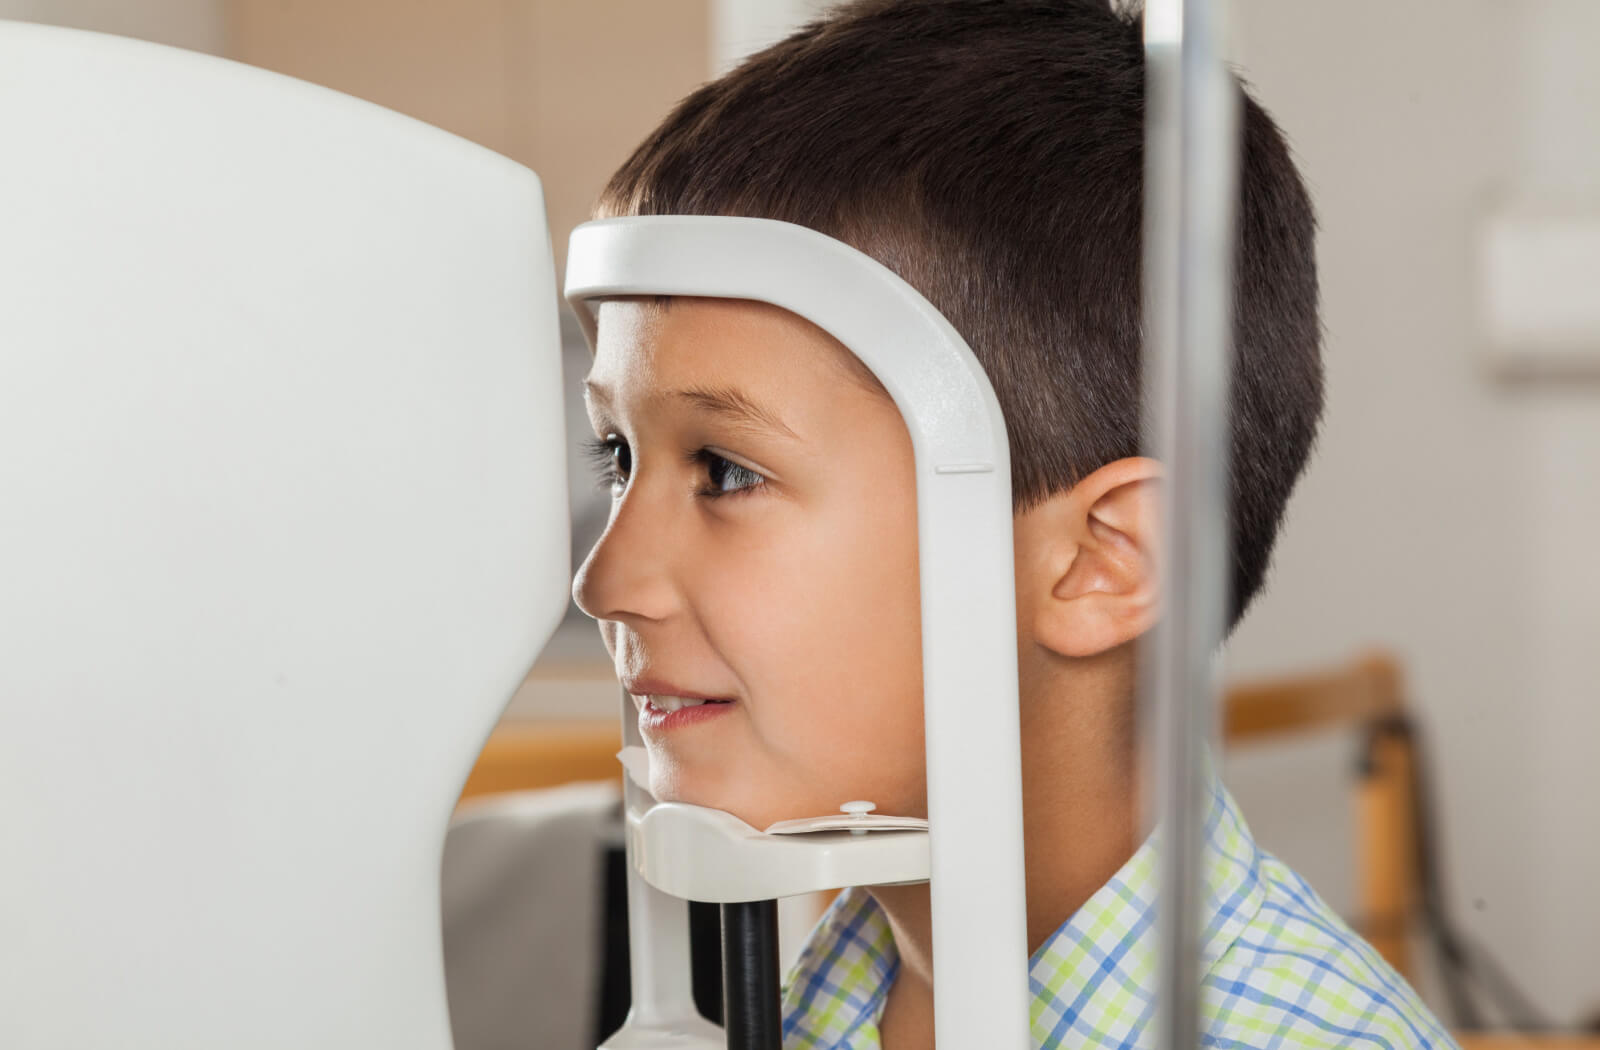 A boy sitting in front of an autorefractor machine at the ophthalmologist clinic getting his regular eye test.